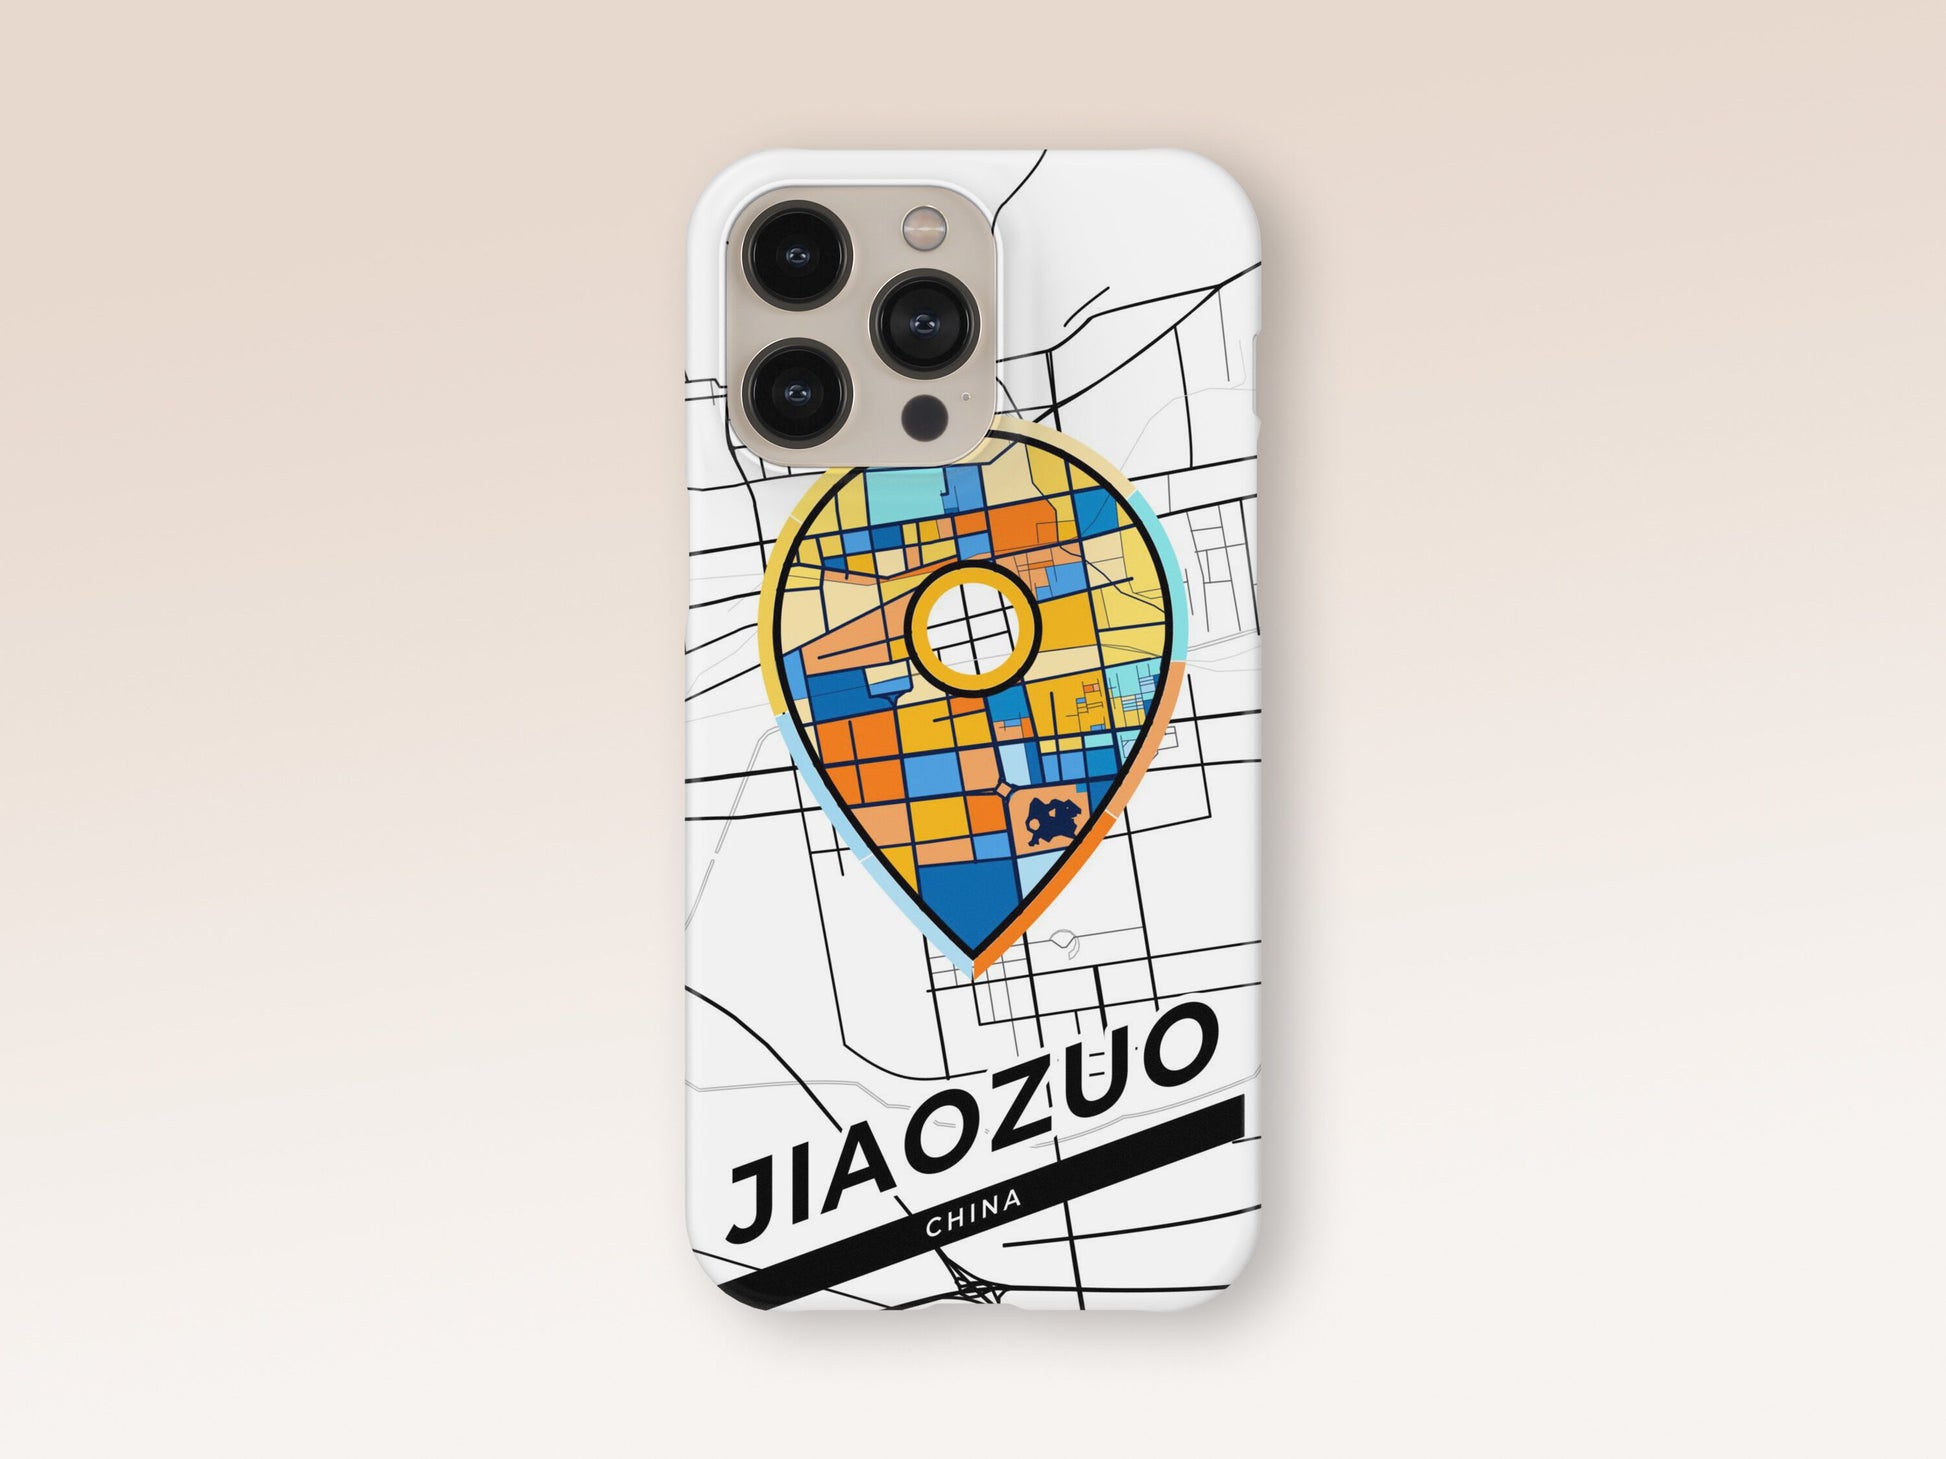 Jiaozuo China slim phone case with colorful icon. Birthday, wedding or housewarming gift. Couple match cases. 1